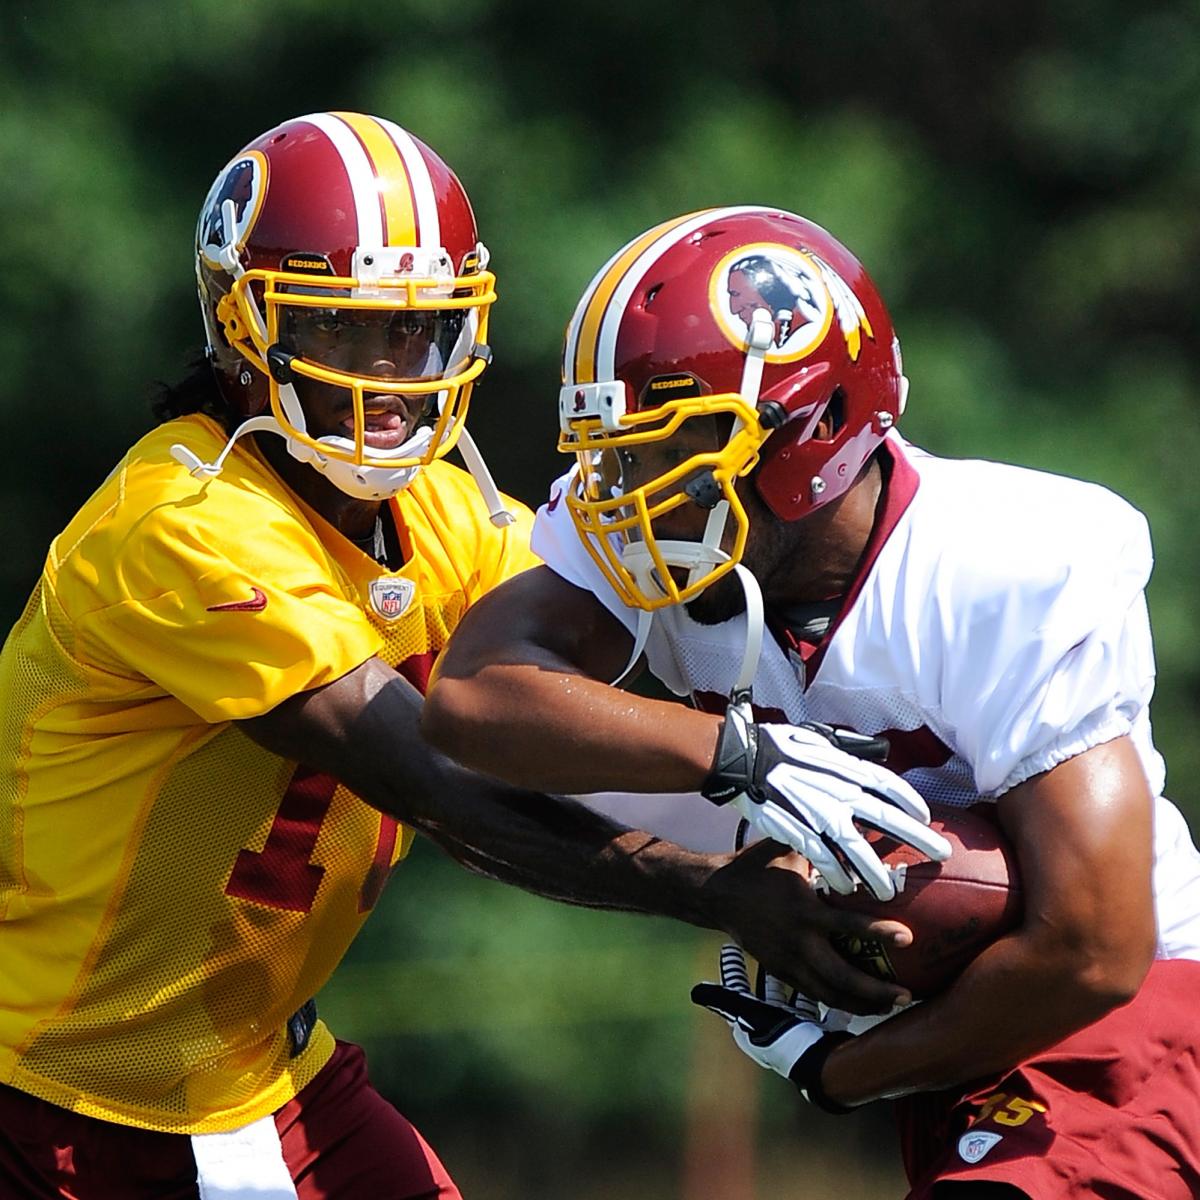 Redskins' First Official Depth Chart Published with a Surprising